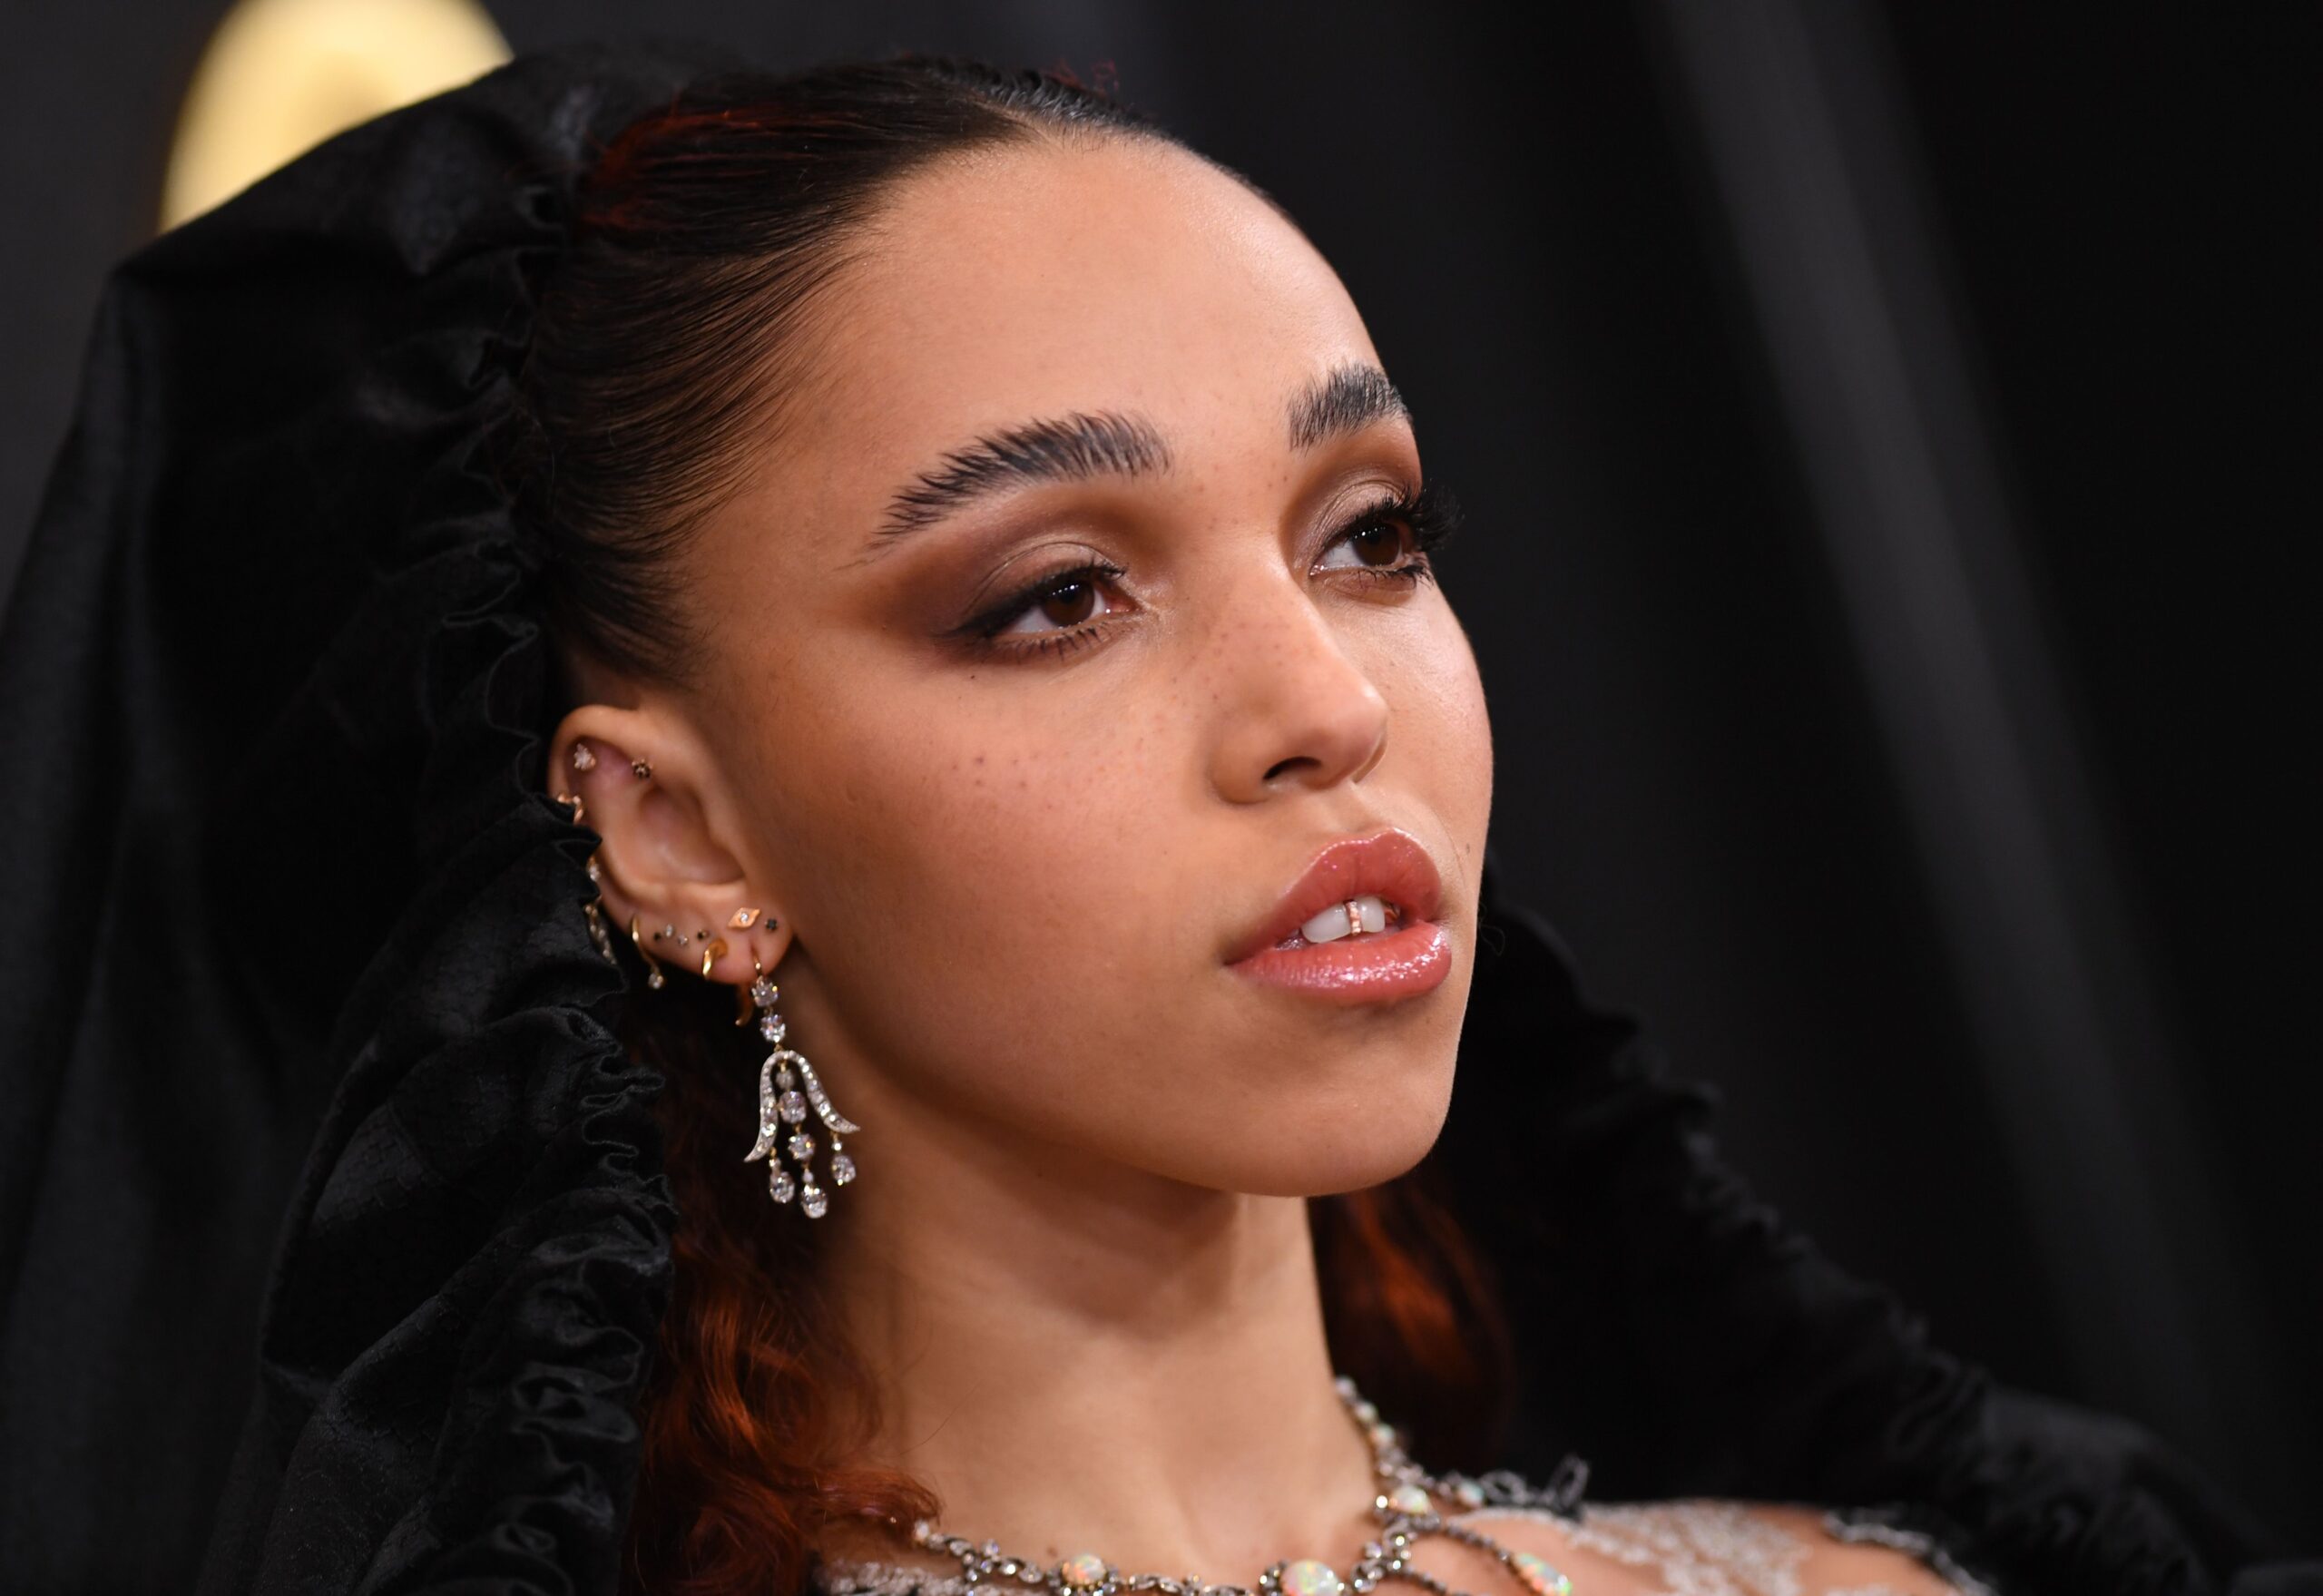 FKA Twigs Files Lawsuit Against Shia LaBeouf Alleging Physical Abuse